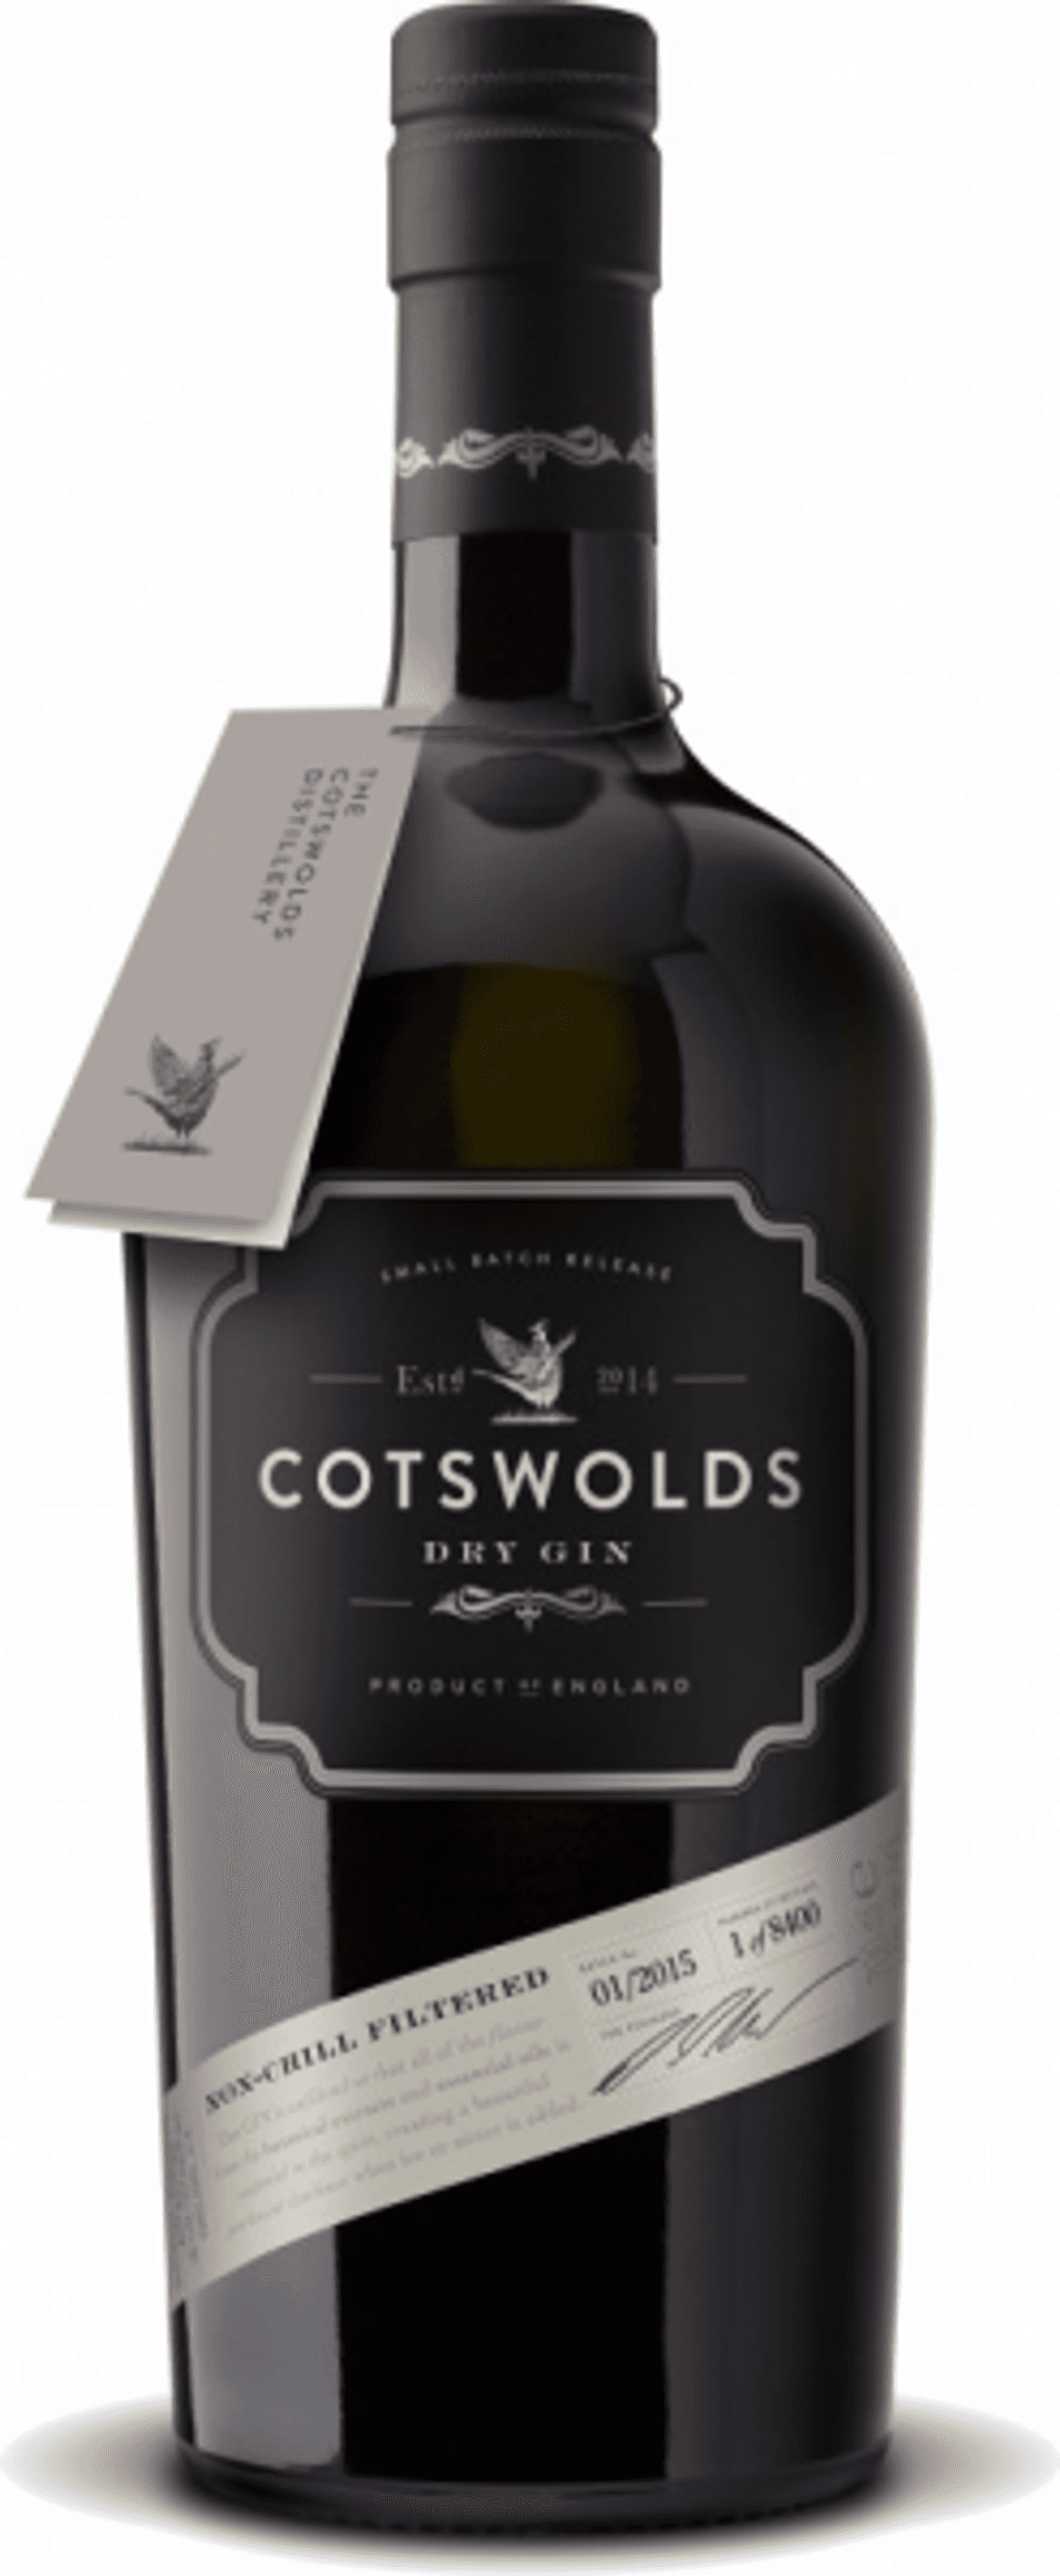 Cotswolds Dry gin 46%